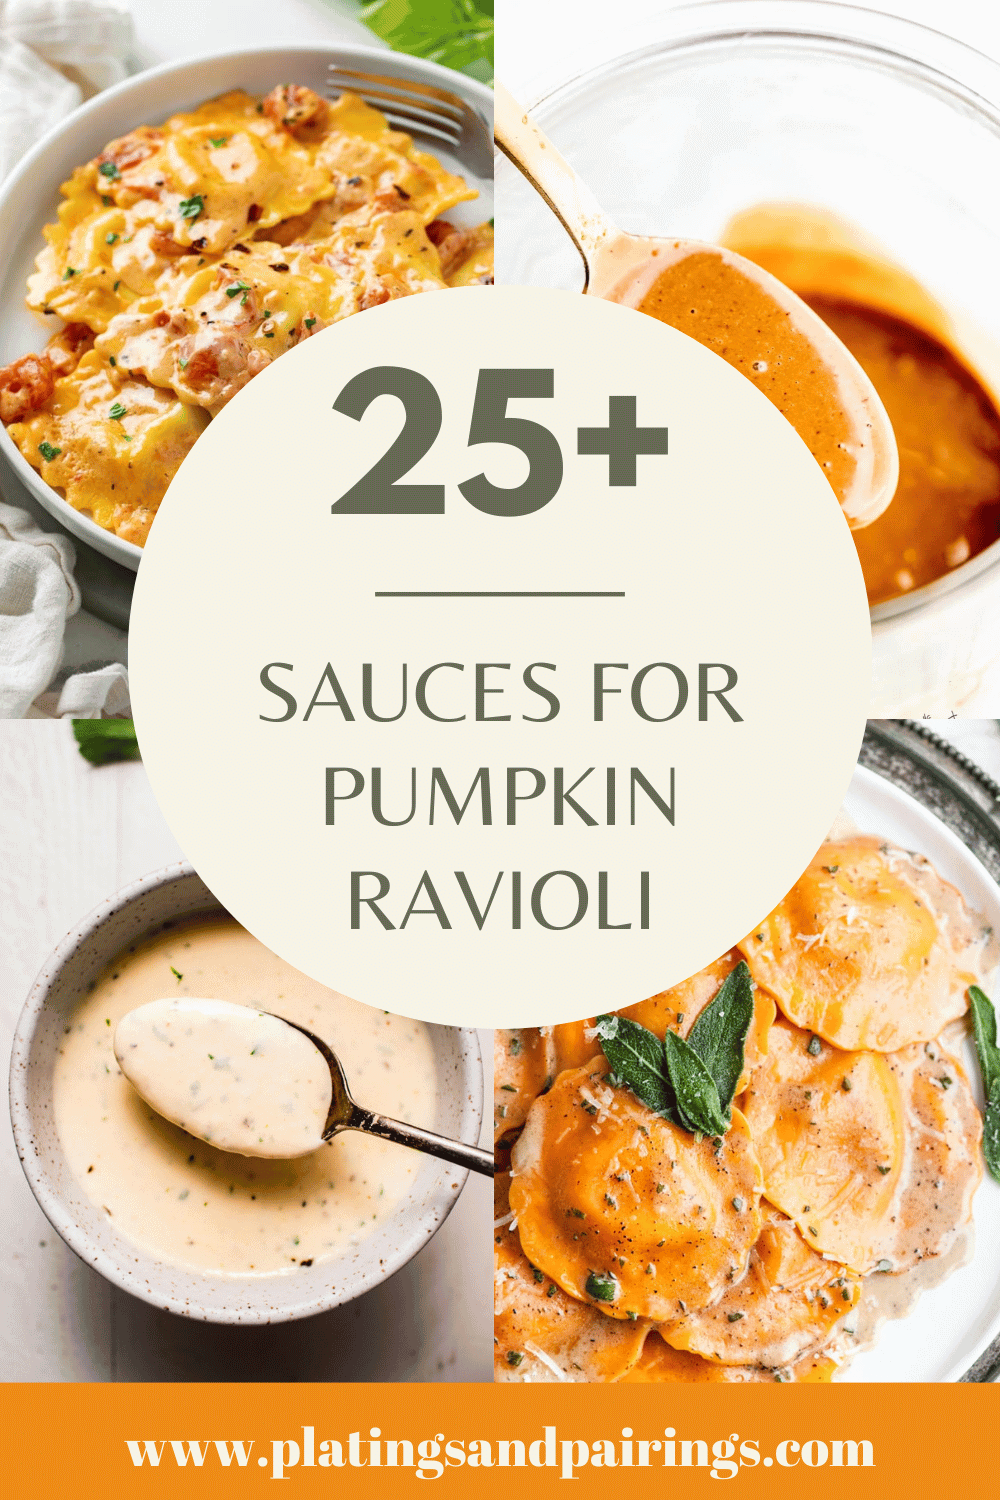 Collage of sauces for pumpkin ravioli with text overlay.